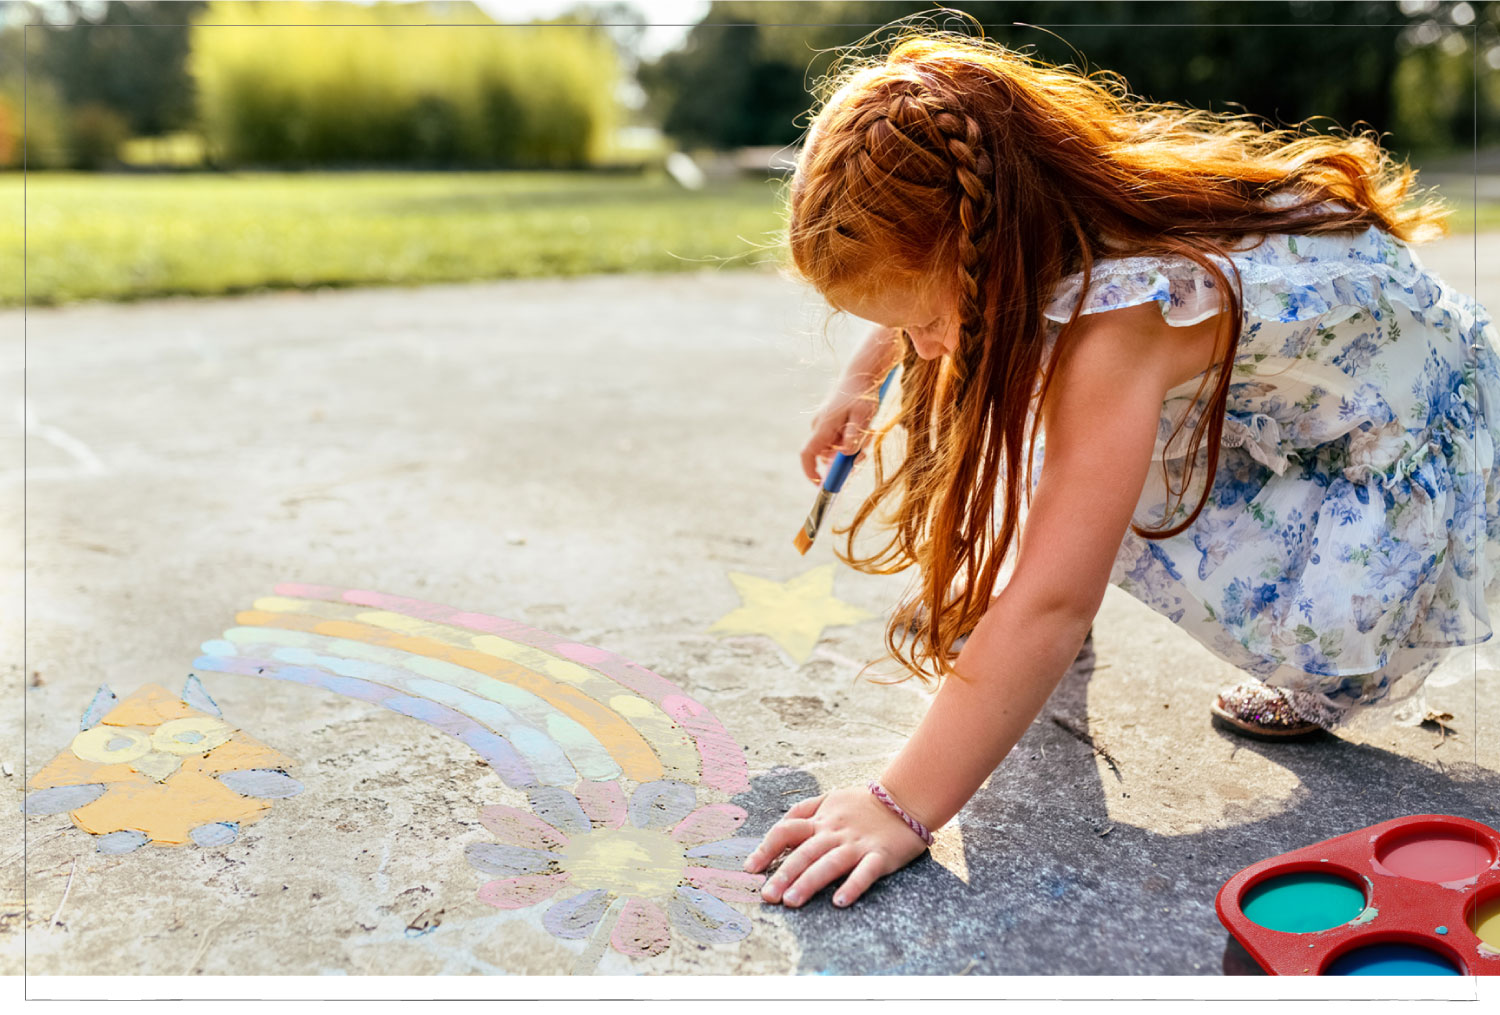 DIY Chalk Paint: Stress Free Summer Activity for All Ages /// By Faith Provencher of Design Fixation with Julia Morrissey #chalkpaint #diy #kids #summer